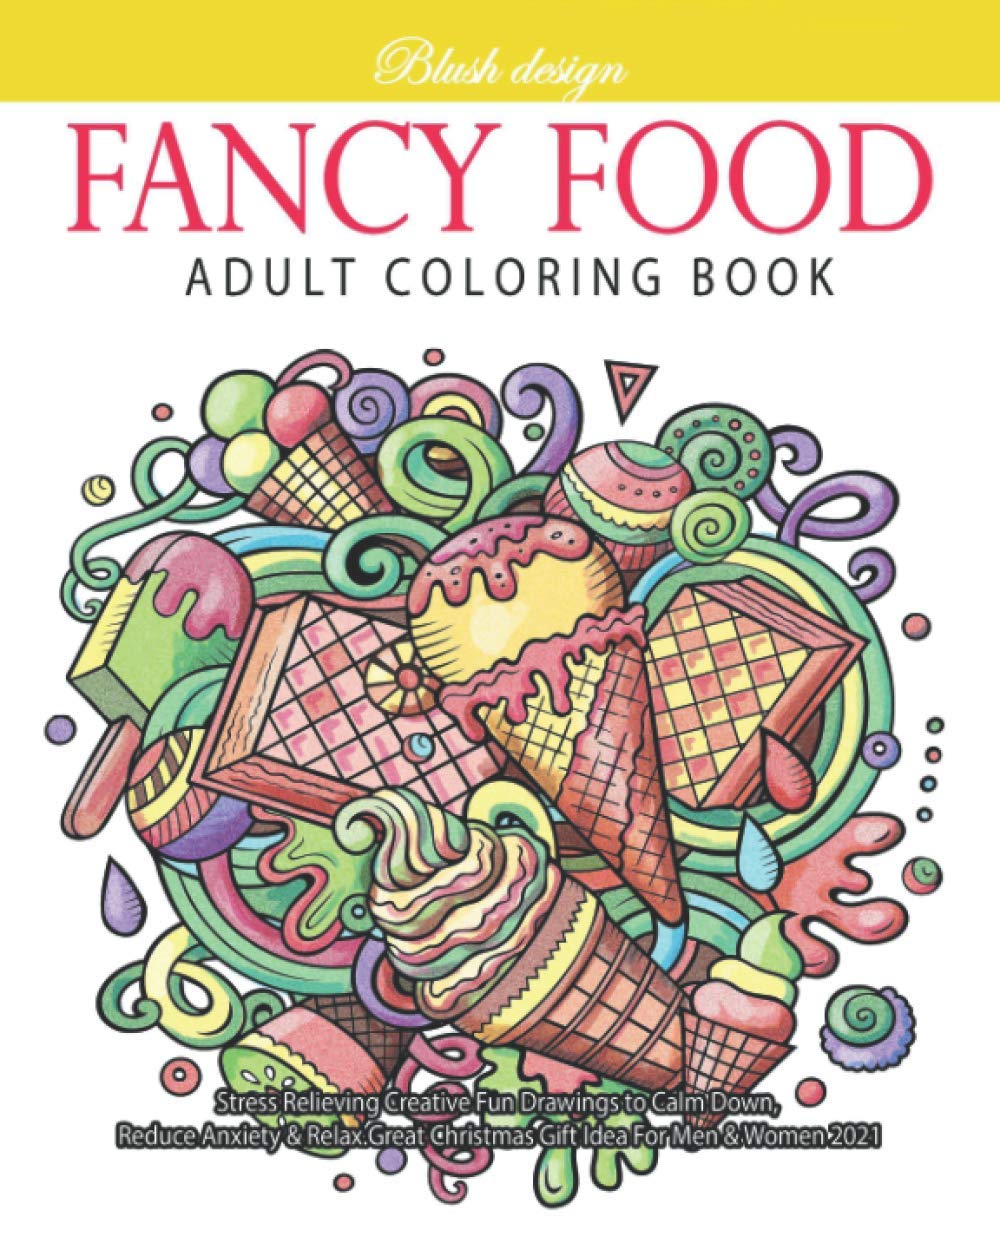 Fancy Food: Adult Coloring Book (Stress Relieving Creative Fun Drawings to Calm Down, Reduce Anxiety & Relax.Great Christmas Gift Idea For Men & Women 2020-2021)